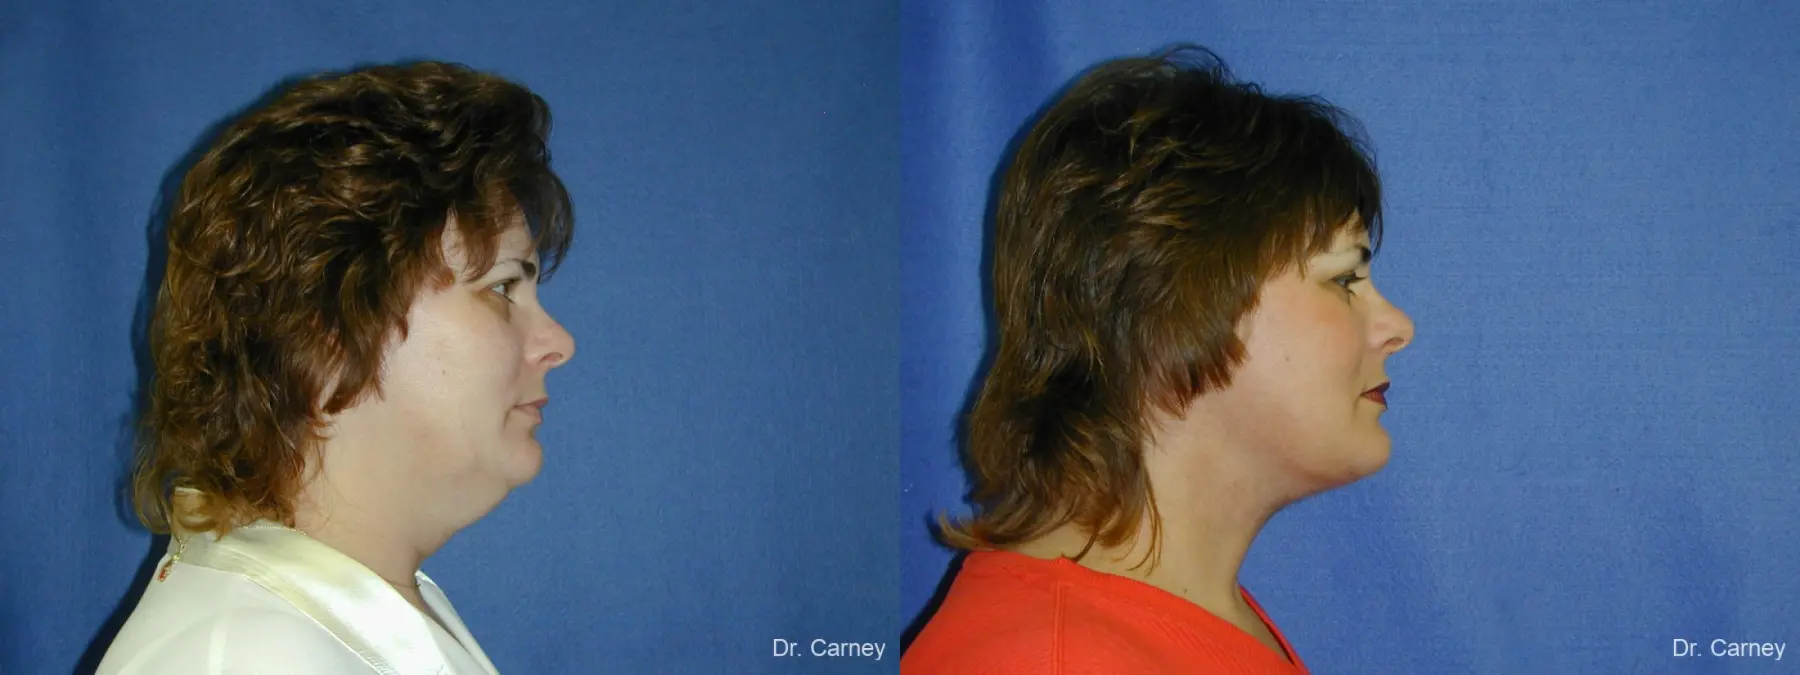 Virginia Beach Neck Lift 1269 - Before and After